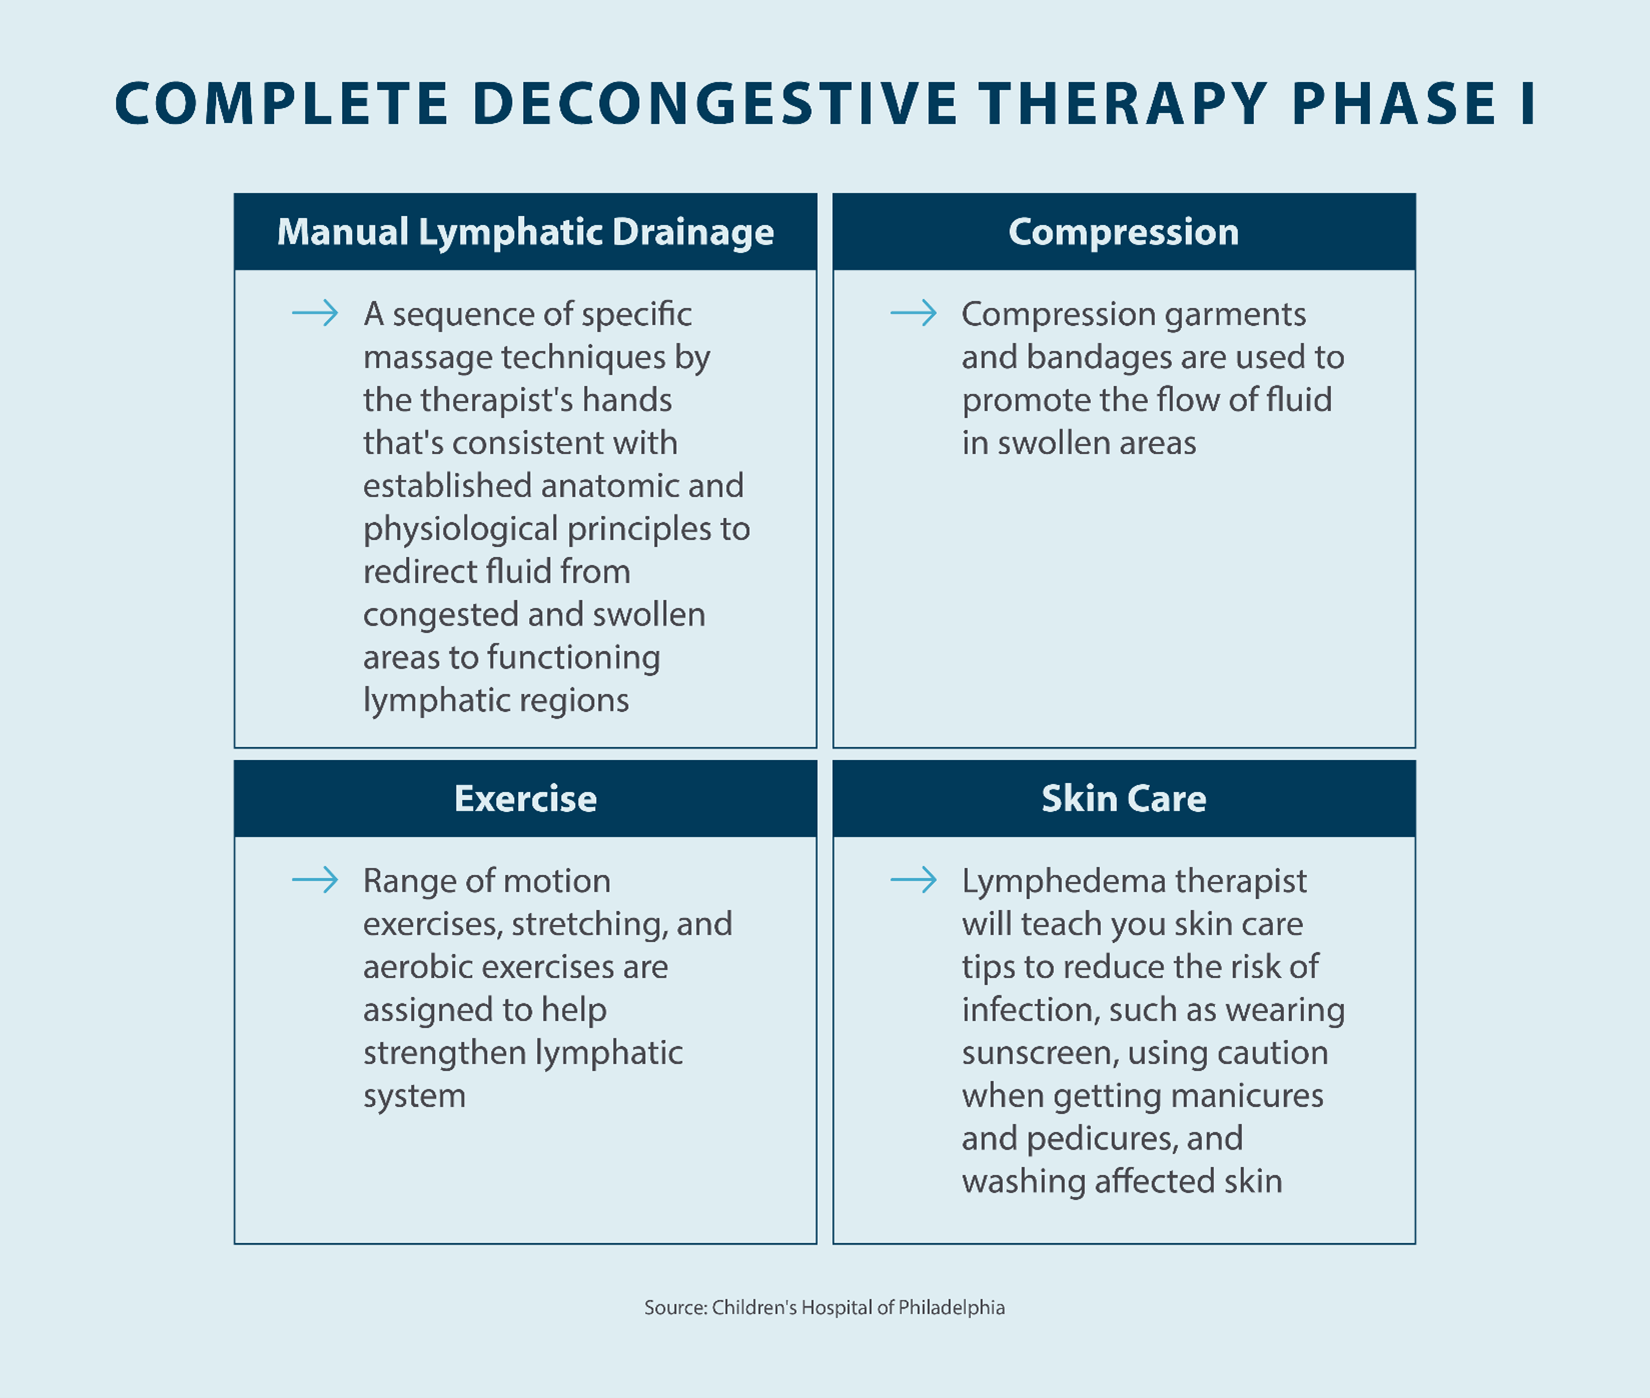 Complete decongestive therapy phase I; manual lymphatic drainage, compression, exercise, skin care